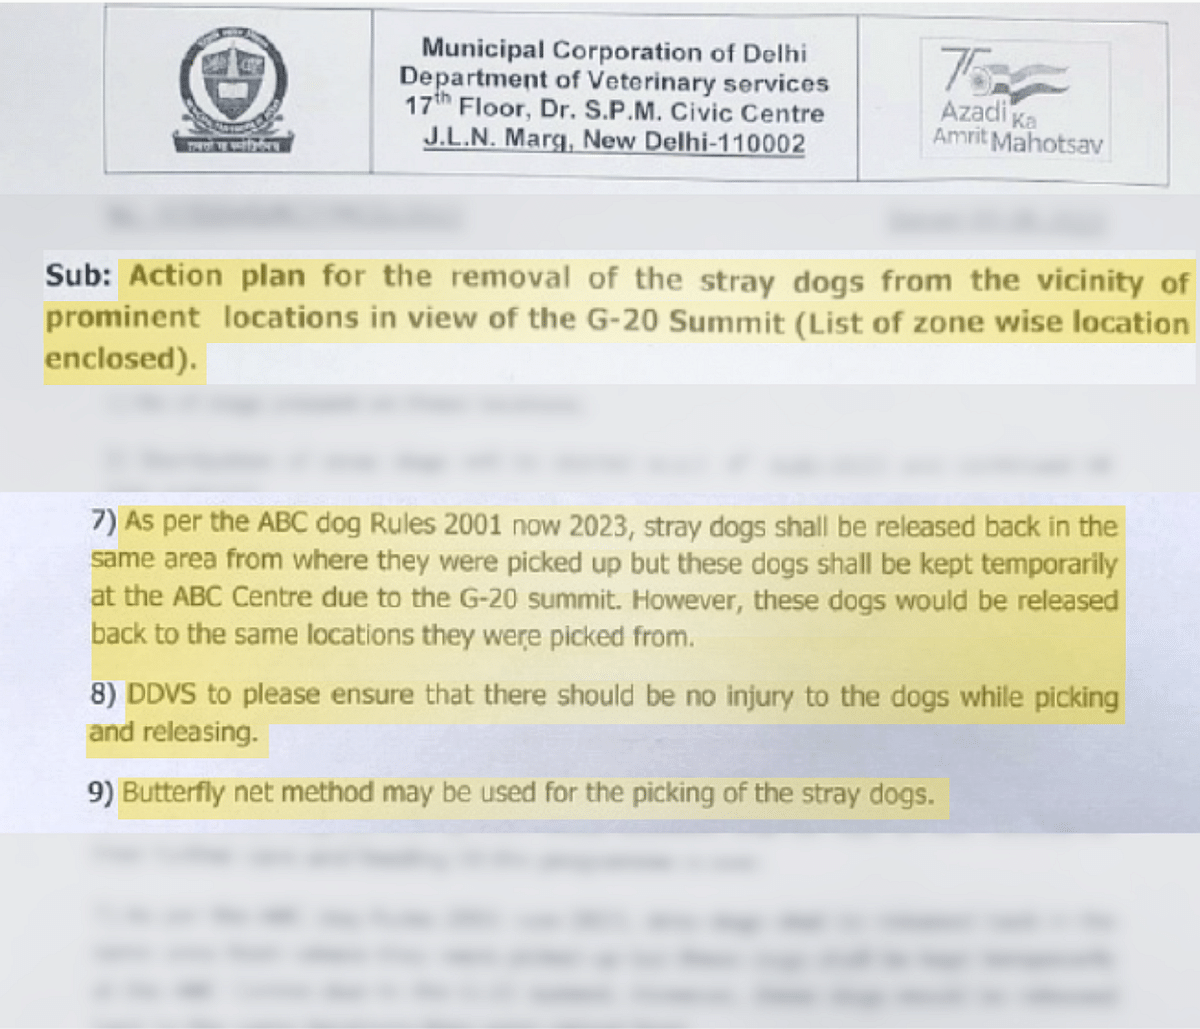 Metal wires were allegedly used to lift dogs up off the ground and huddle them into vehicles before the G20 Summit.